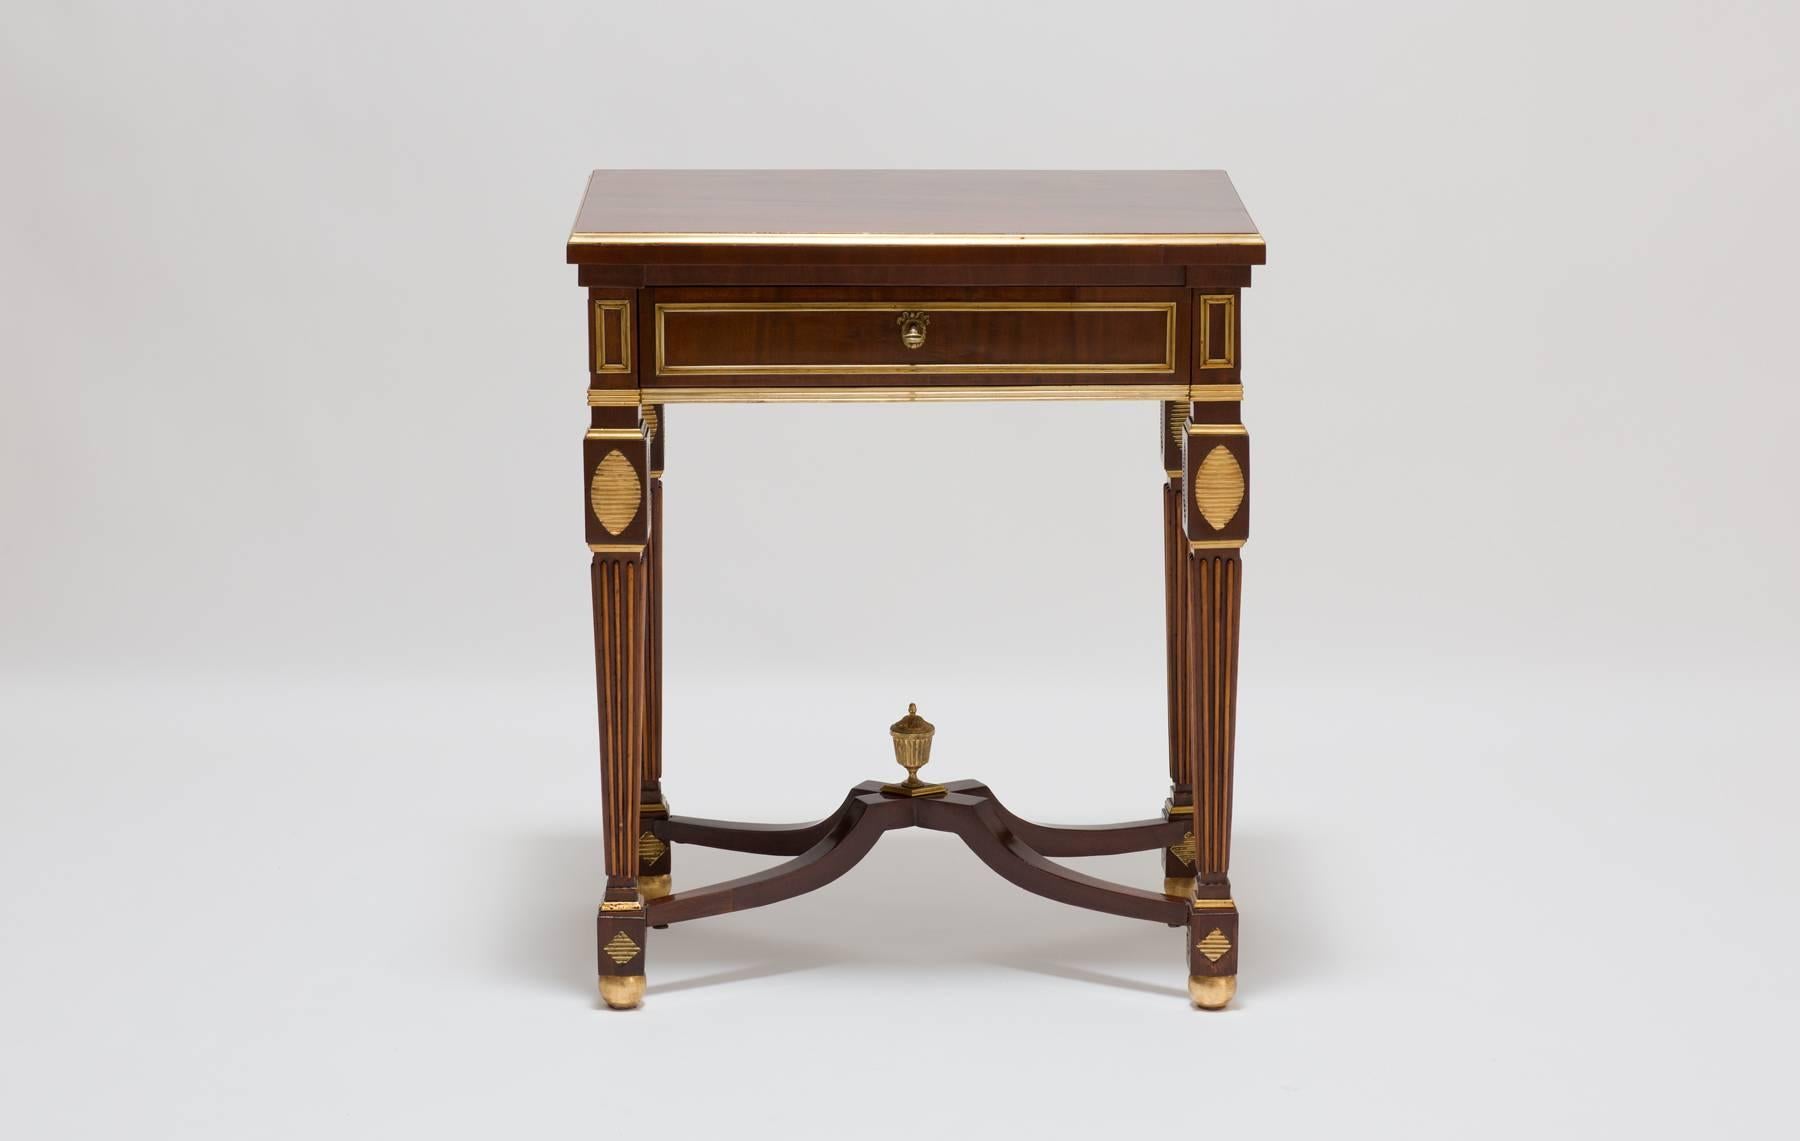 A very elegant antique Russian table from the 18th century. The table is made from mahogany wood and is fitted with typically brass borders. The antique table has one drawer at the front. Raised on square tapering legs joined by an X-form stretcher